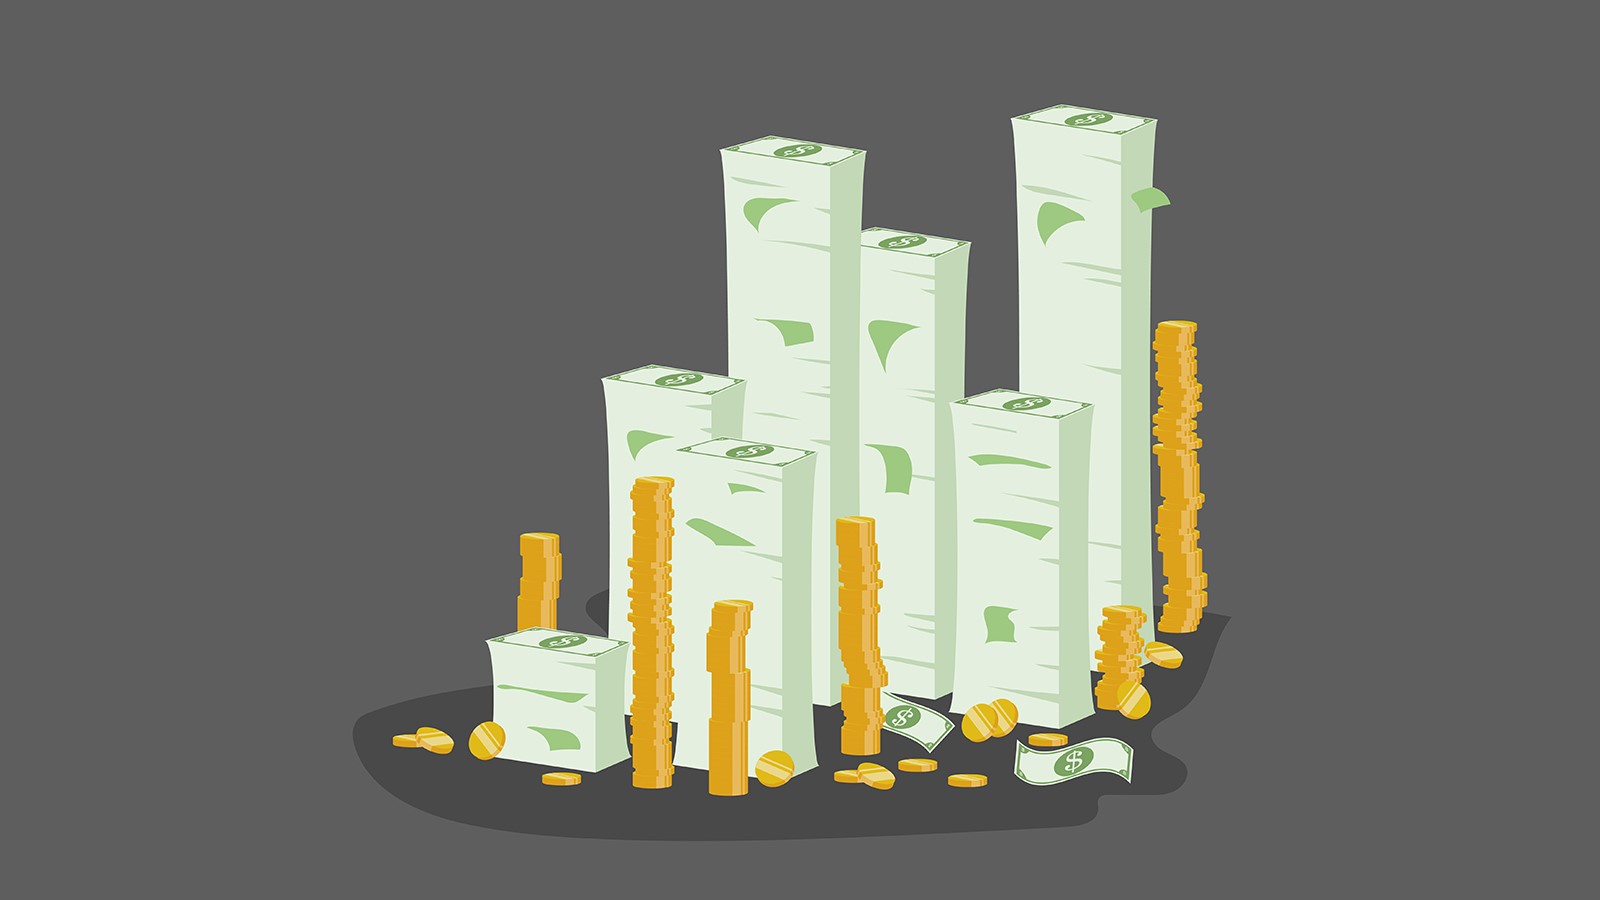 Cartoonish drawing of piles of money. There are seven piles of pale green paper money stacked up, at varying levels. These are surrounded by six stacks of gold coins, also of different heights. There are a few single, gold coins scattered at the foot of the piles of coins.